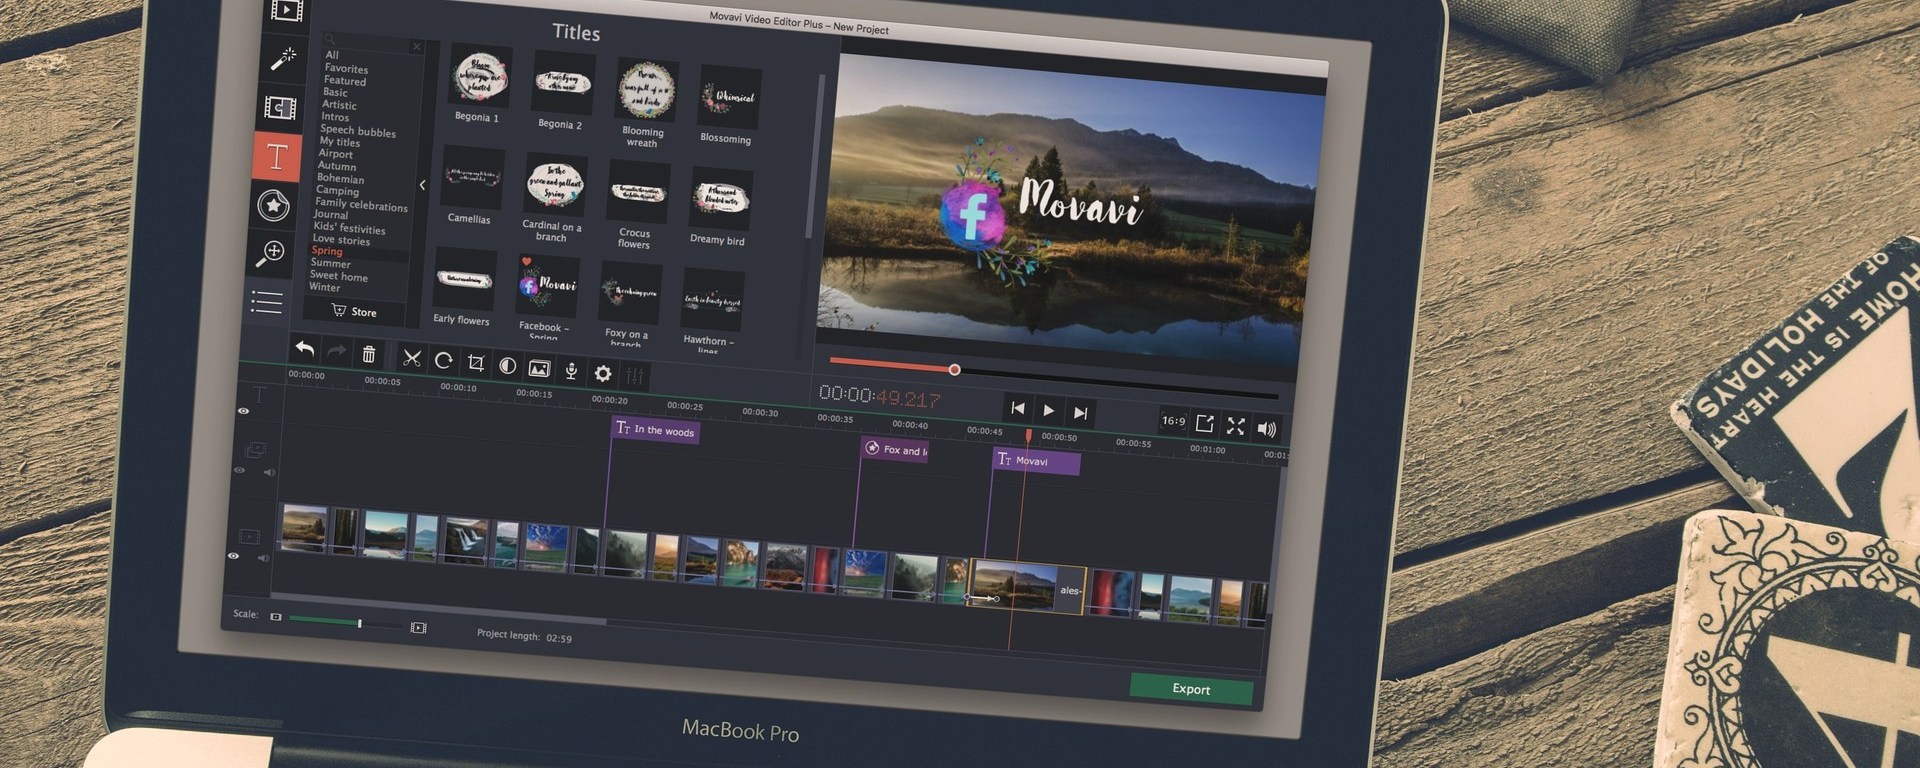 movavi video editor 14 plus system requirements